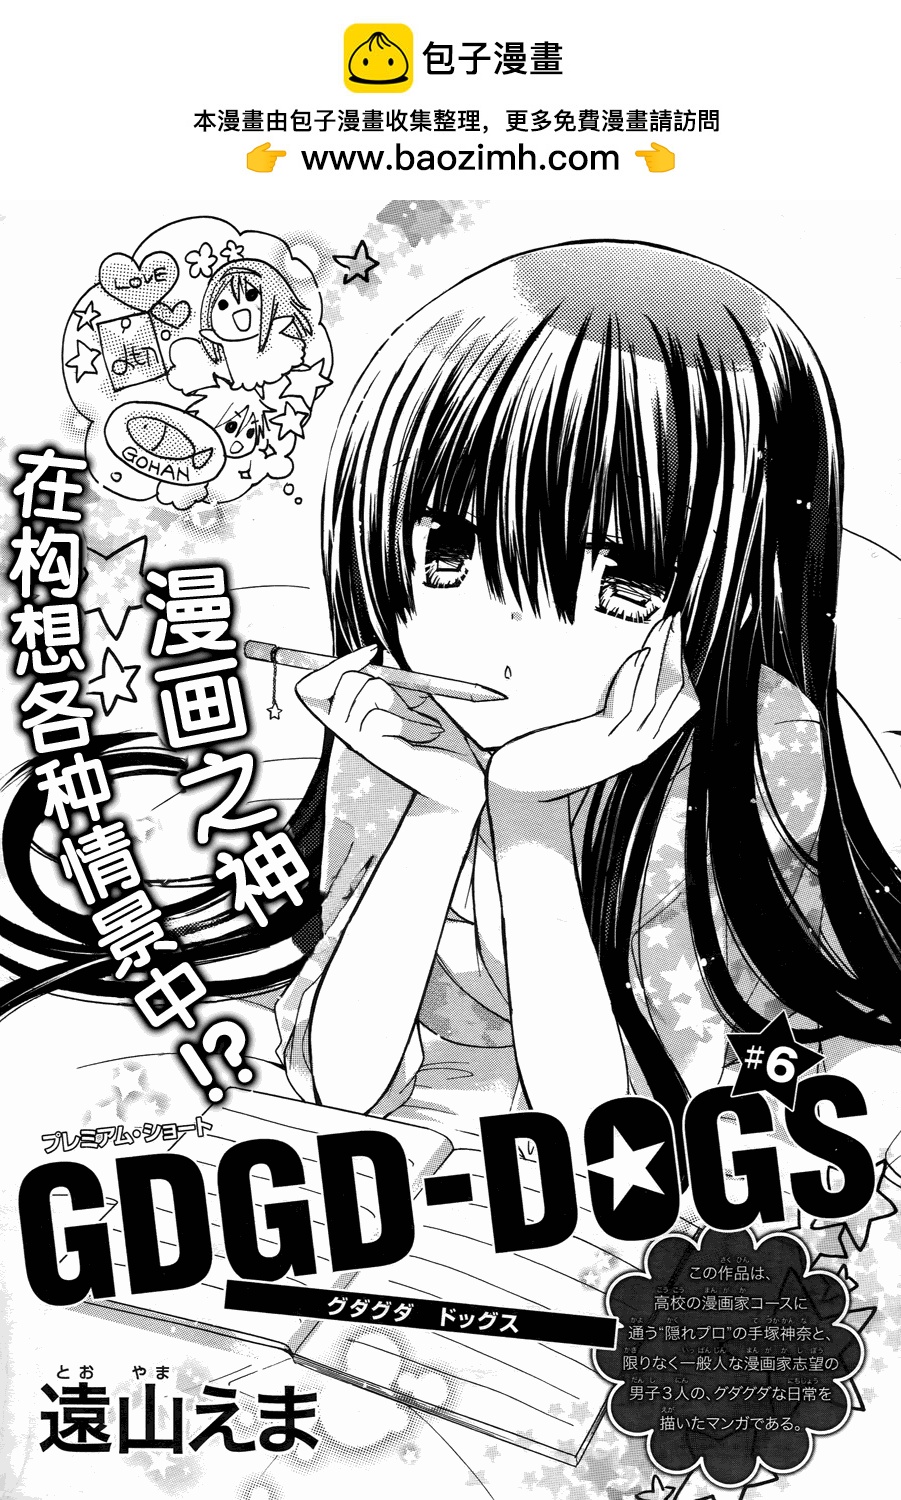 GDGD-DOGS - 第06話 - 1